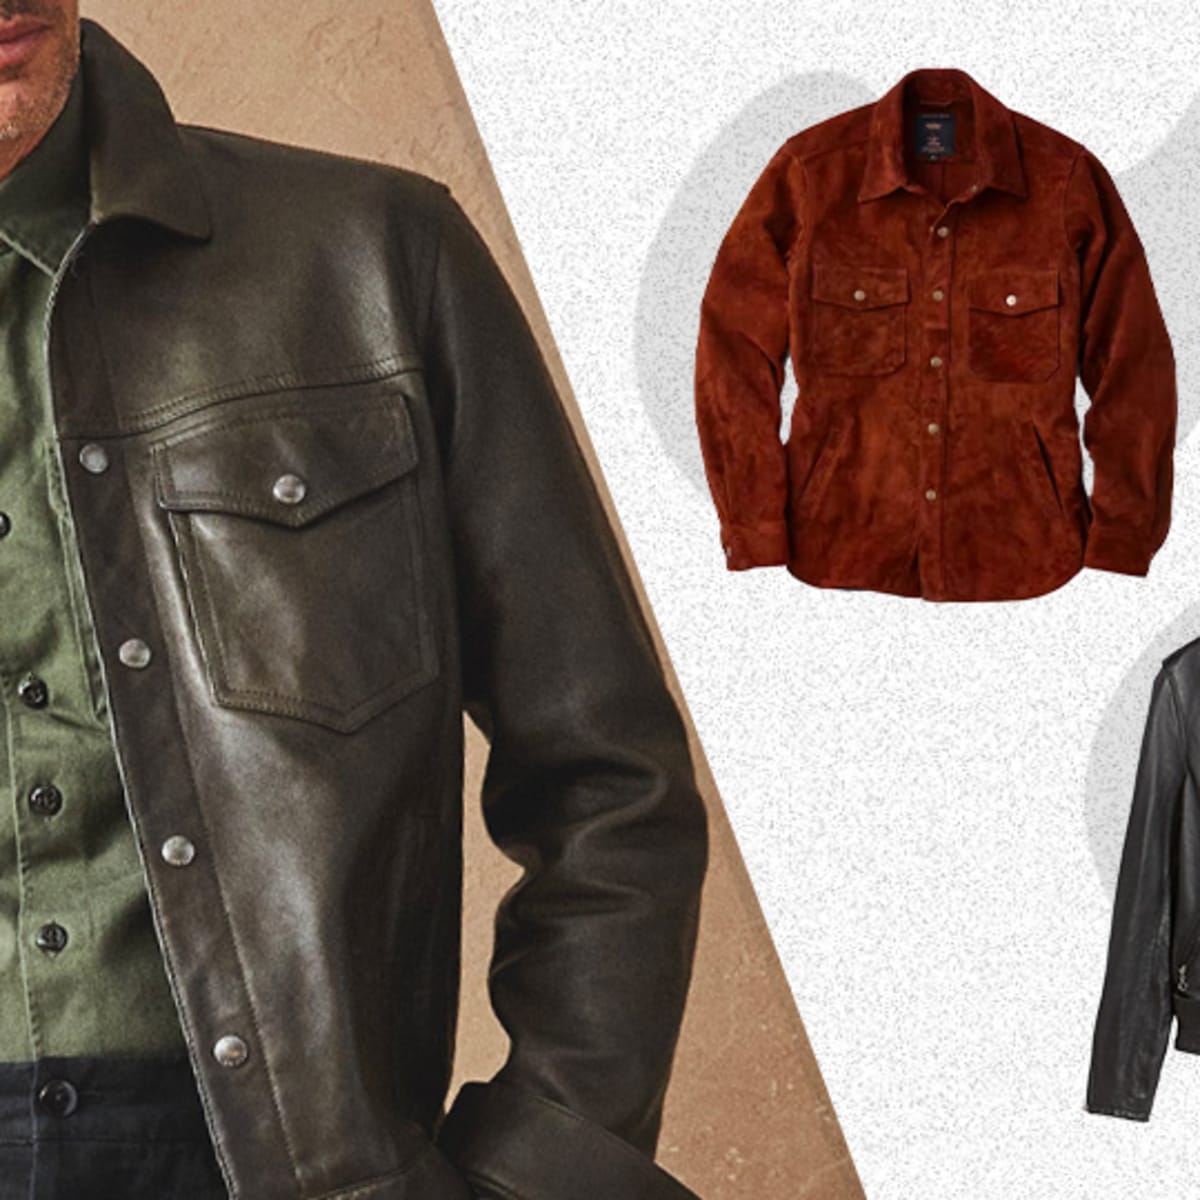 The 14 Best Leather Jackets for Men in 2023